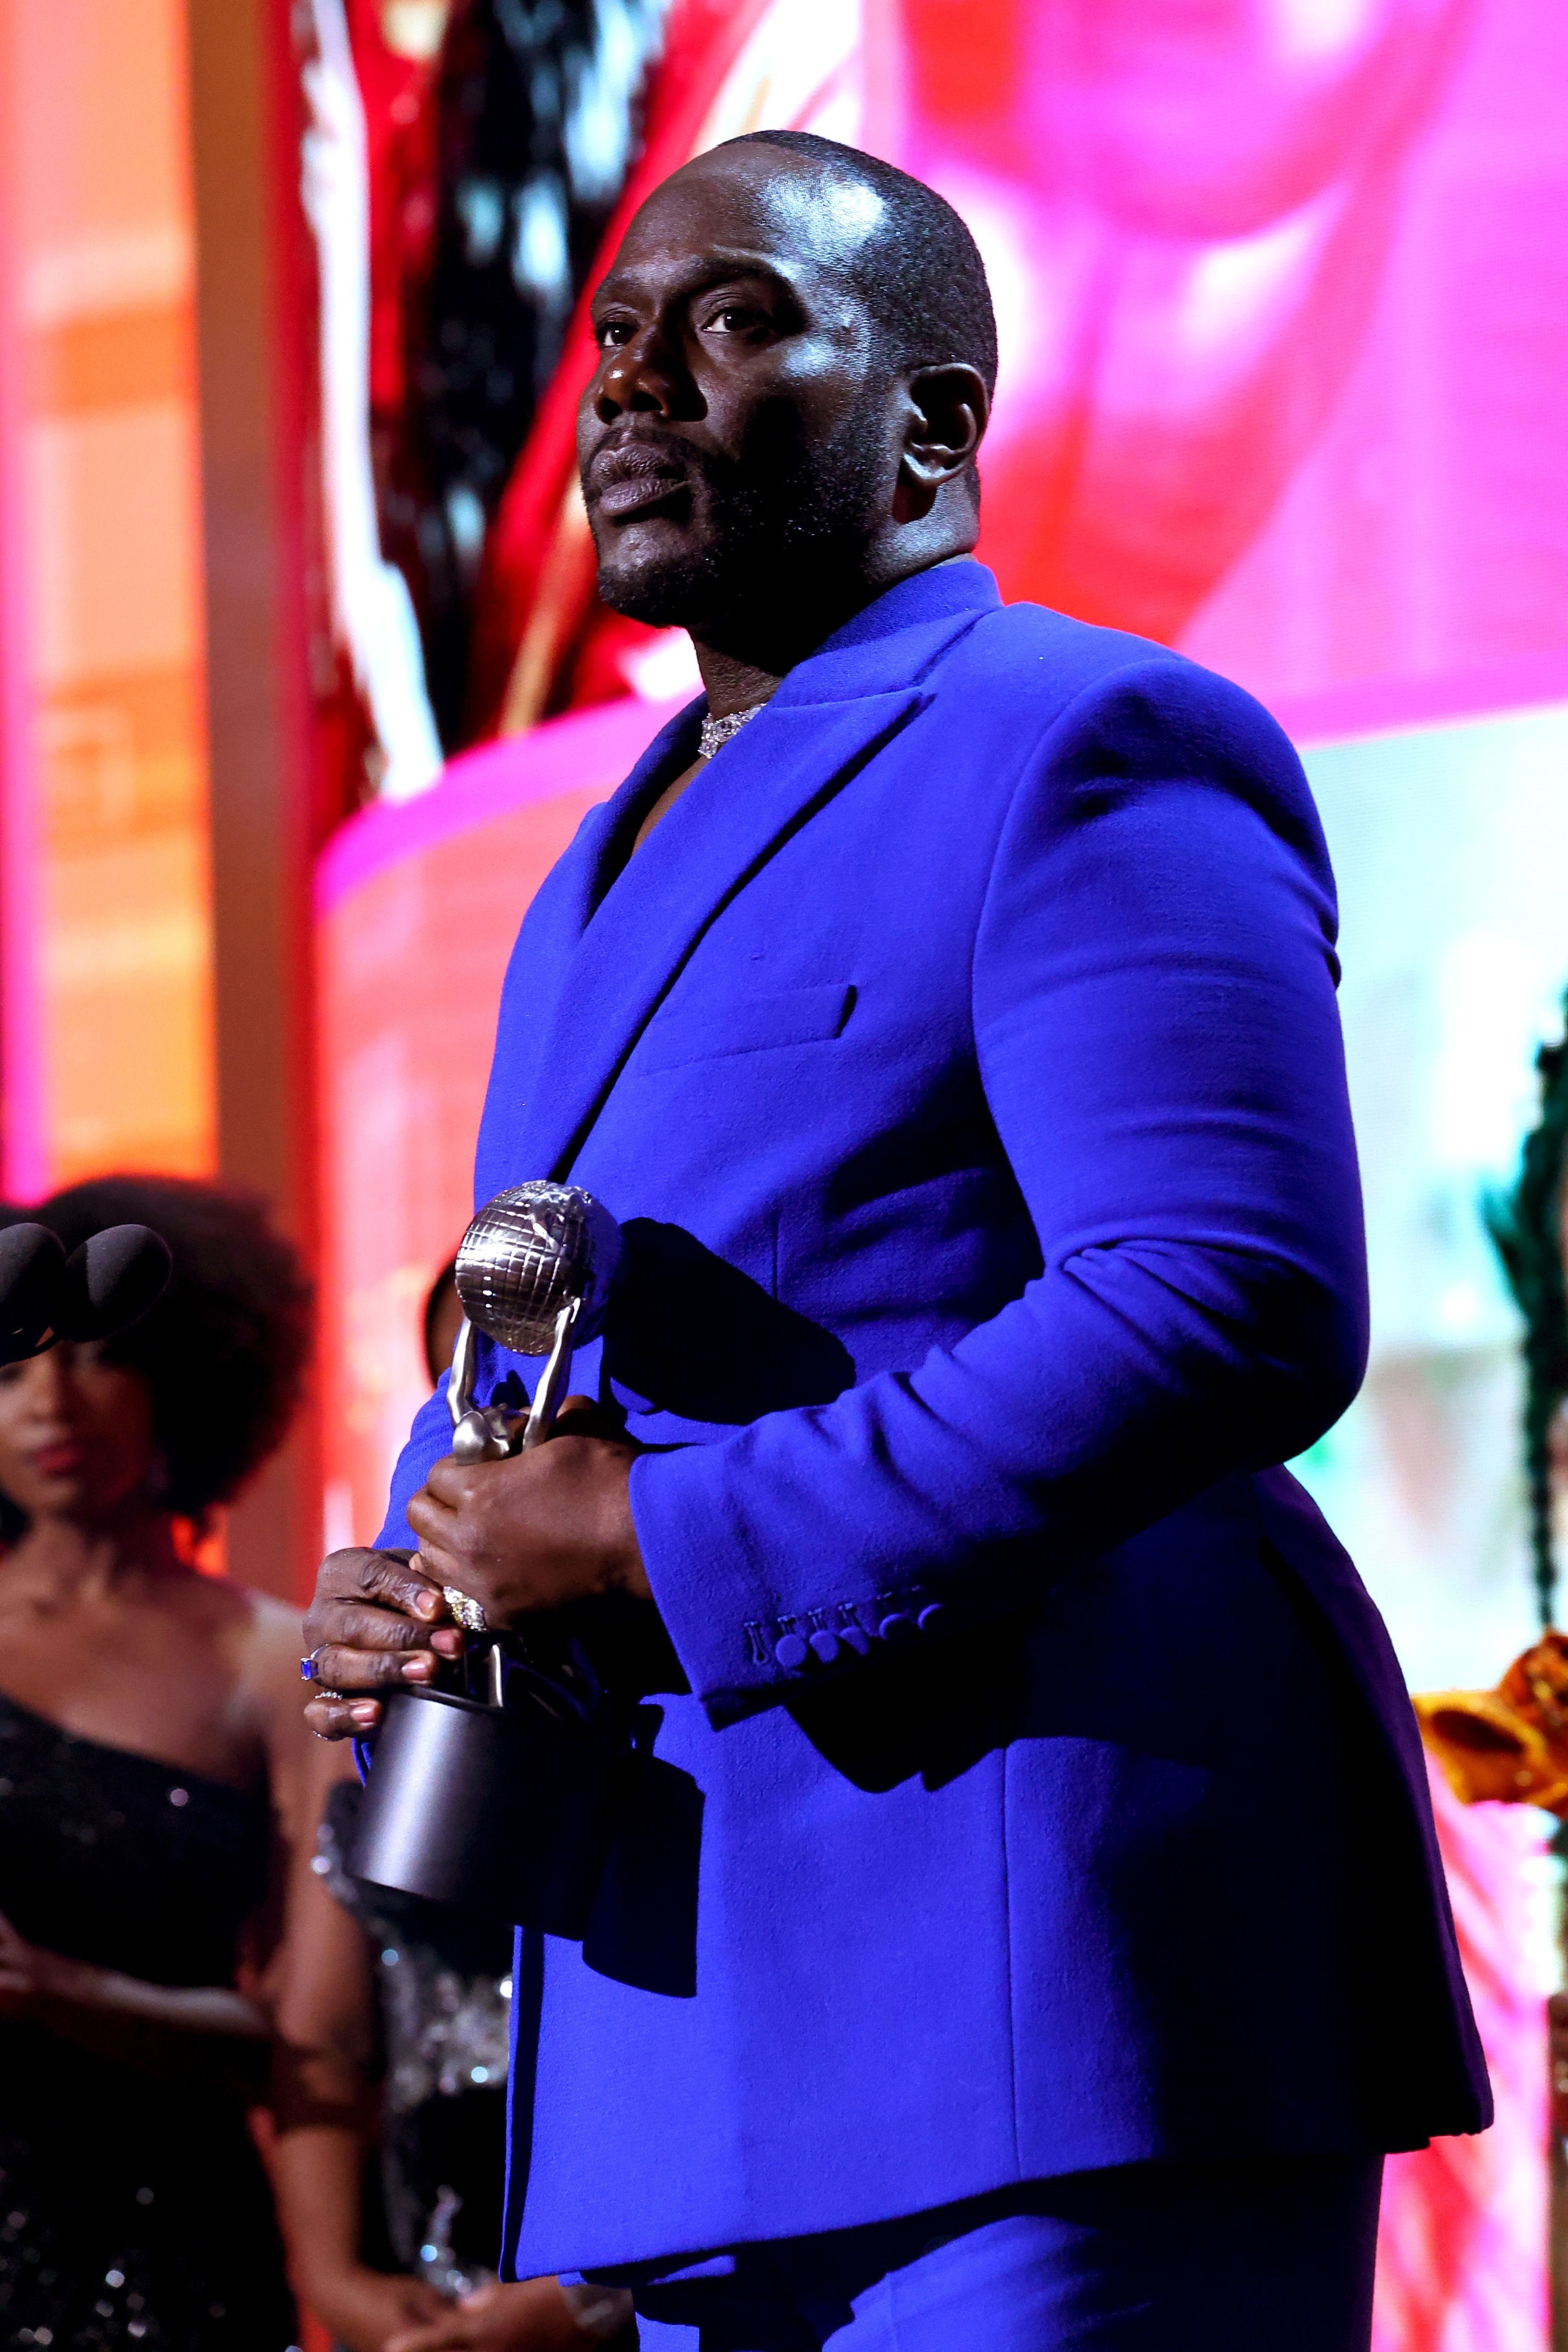 Michael Jordan in a tailored suit, holding an award onstage